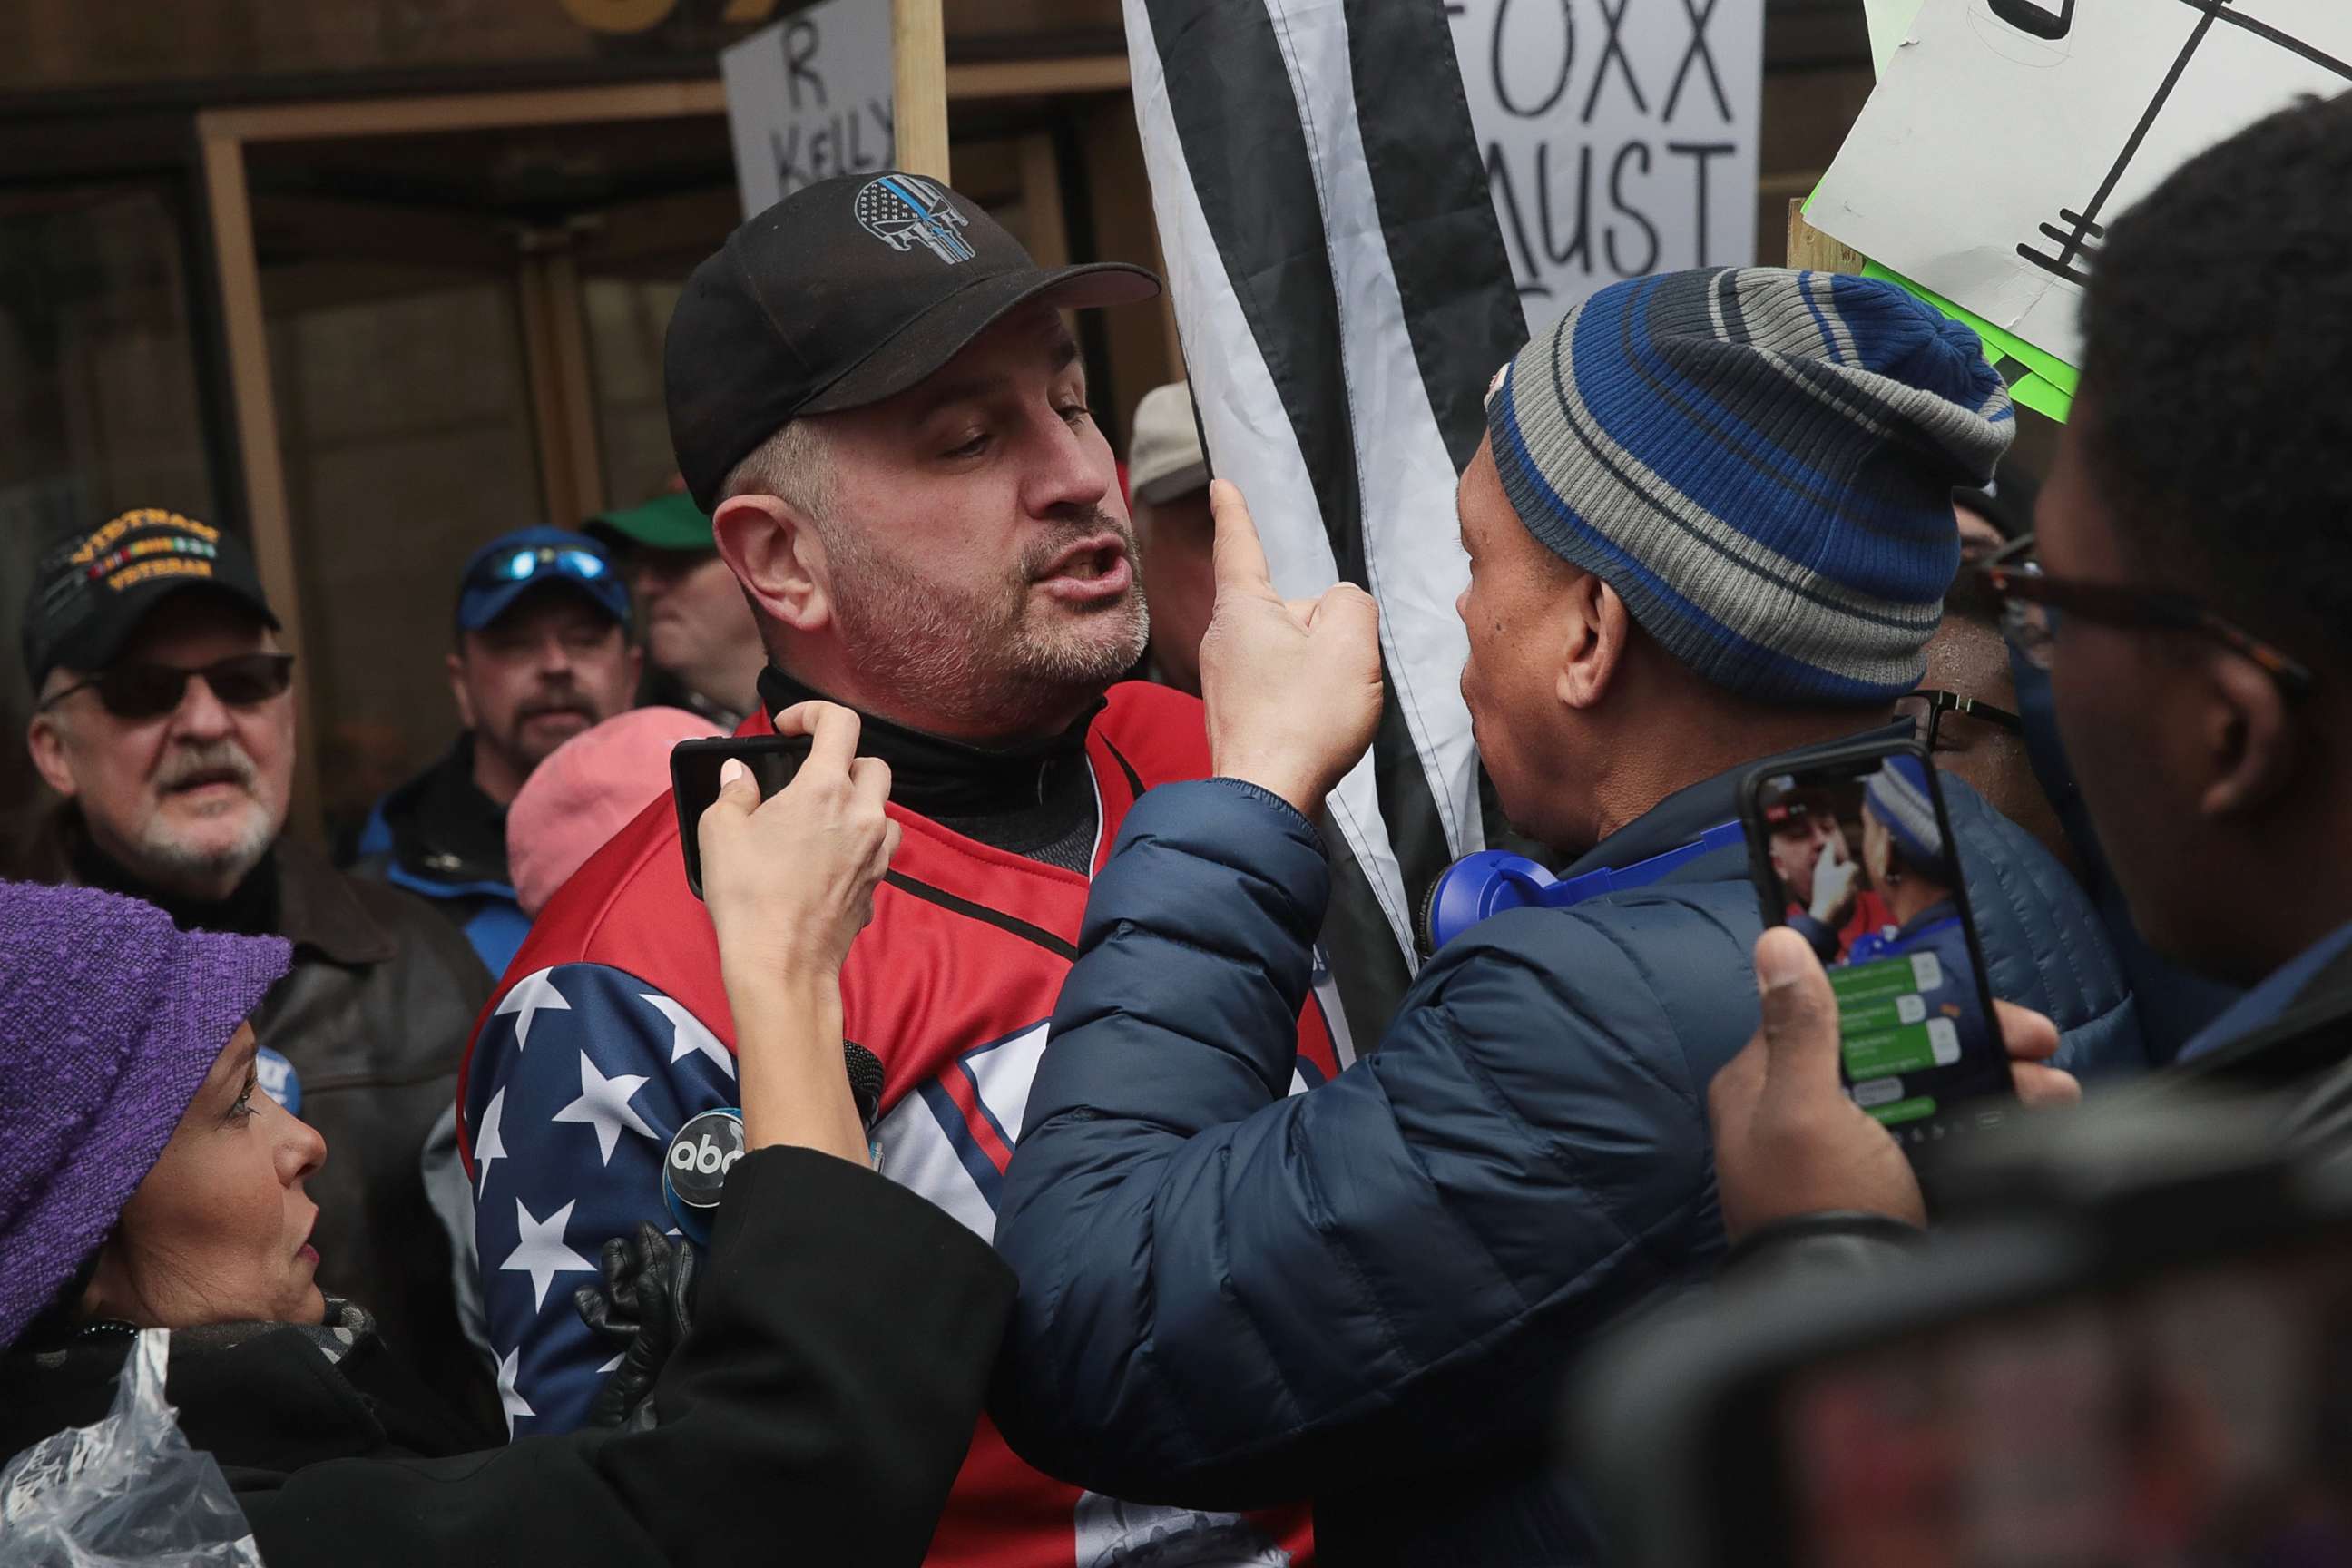 PHOTO: Opposing sides argue during a demonstration organized by the Fraternal Order of Police to call for Foxx's removal, April 01, 2019, in Chicago. 